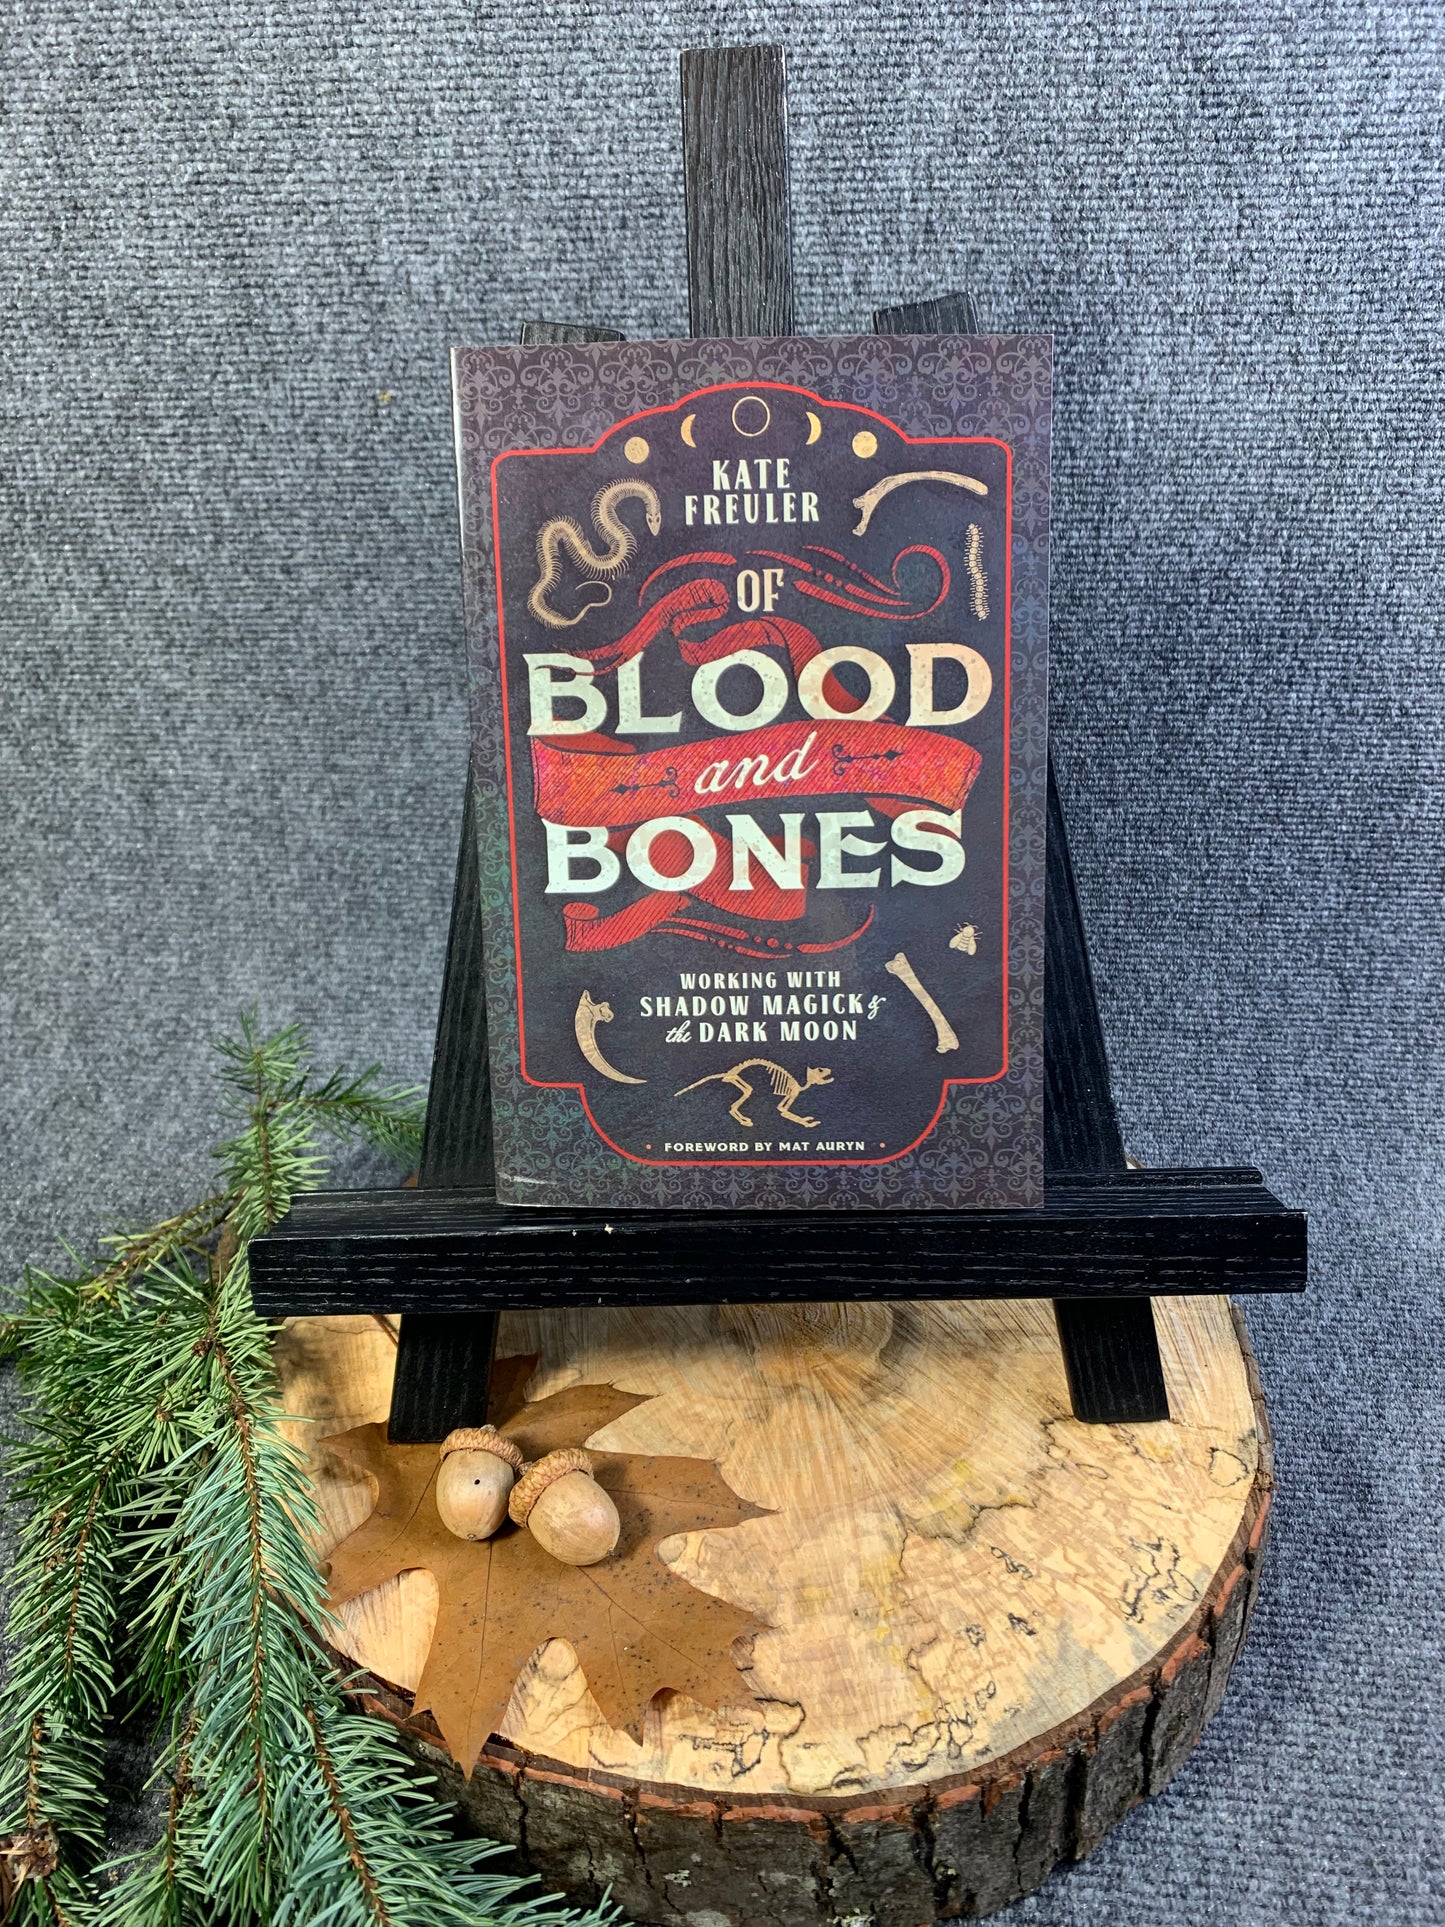 Of Blood and Bones by Kate Freuler